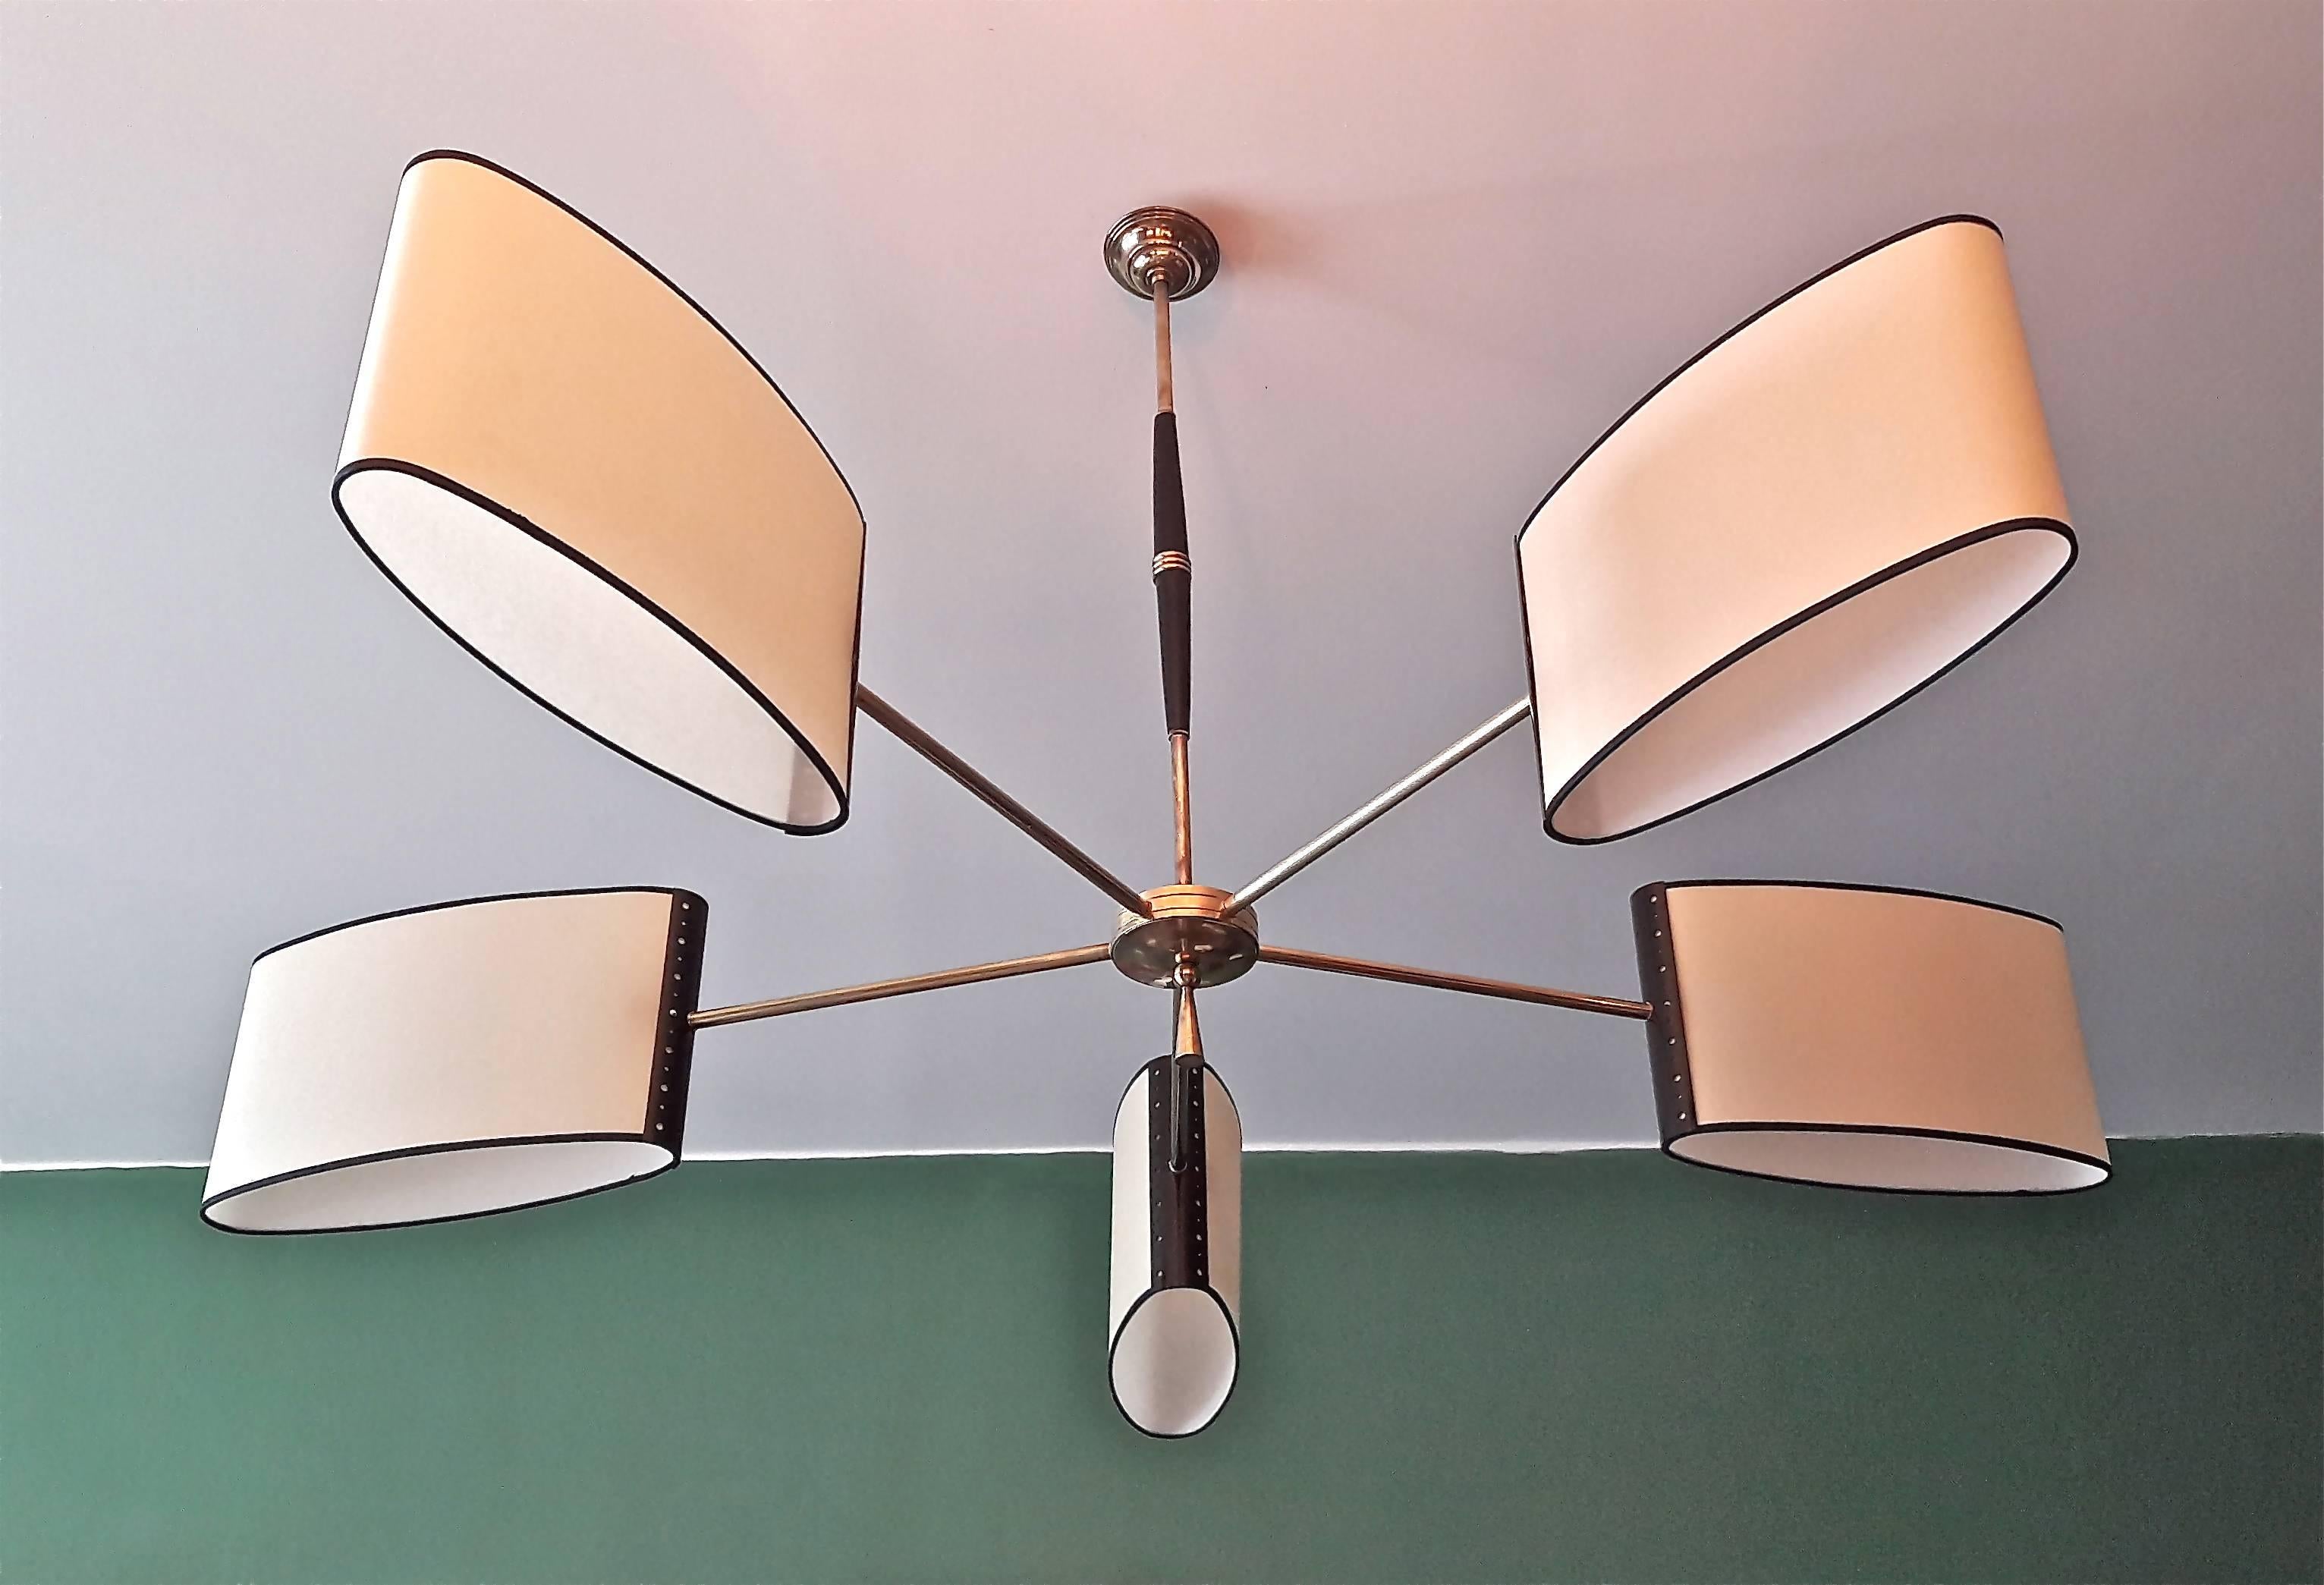 Brass and wood circular chandelier consisting of five lighted brass arms on which are arranged oval-shaped lampshades, fixed on perforated metal plates.
The arms are connected by a circular brass plate decorated with a brass pendant under the base.